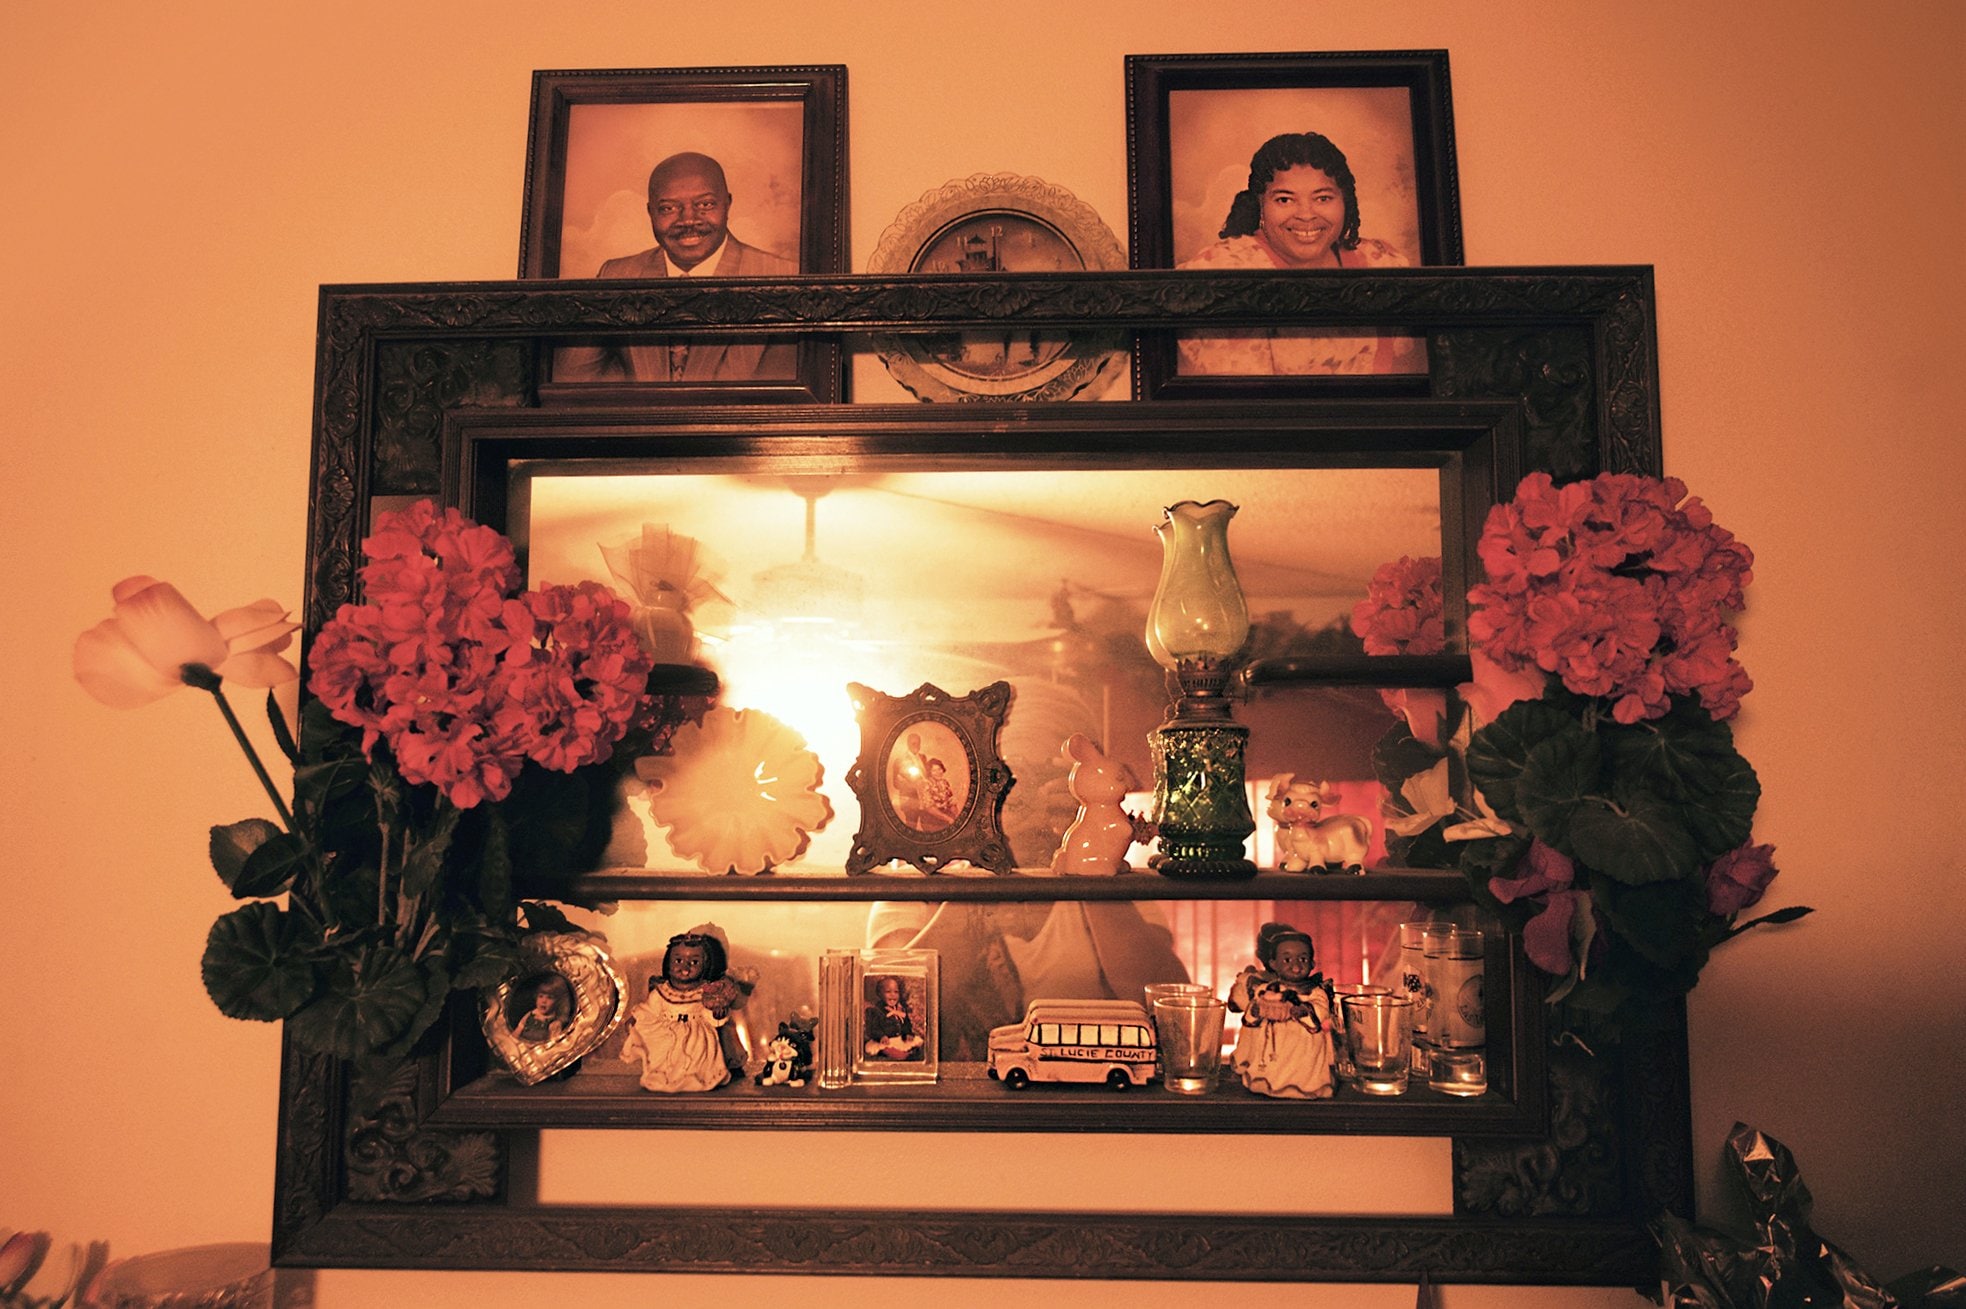 A shelf with mirror, family photos and small decorations.